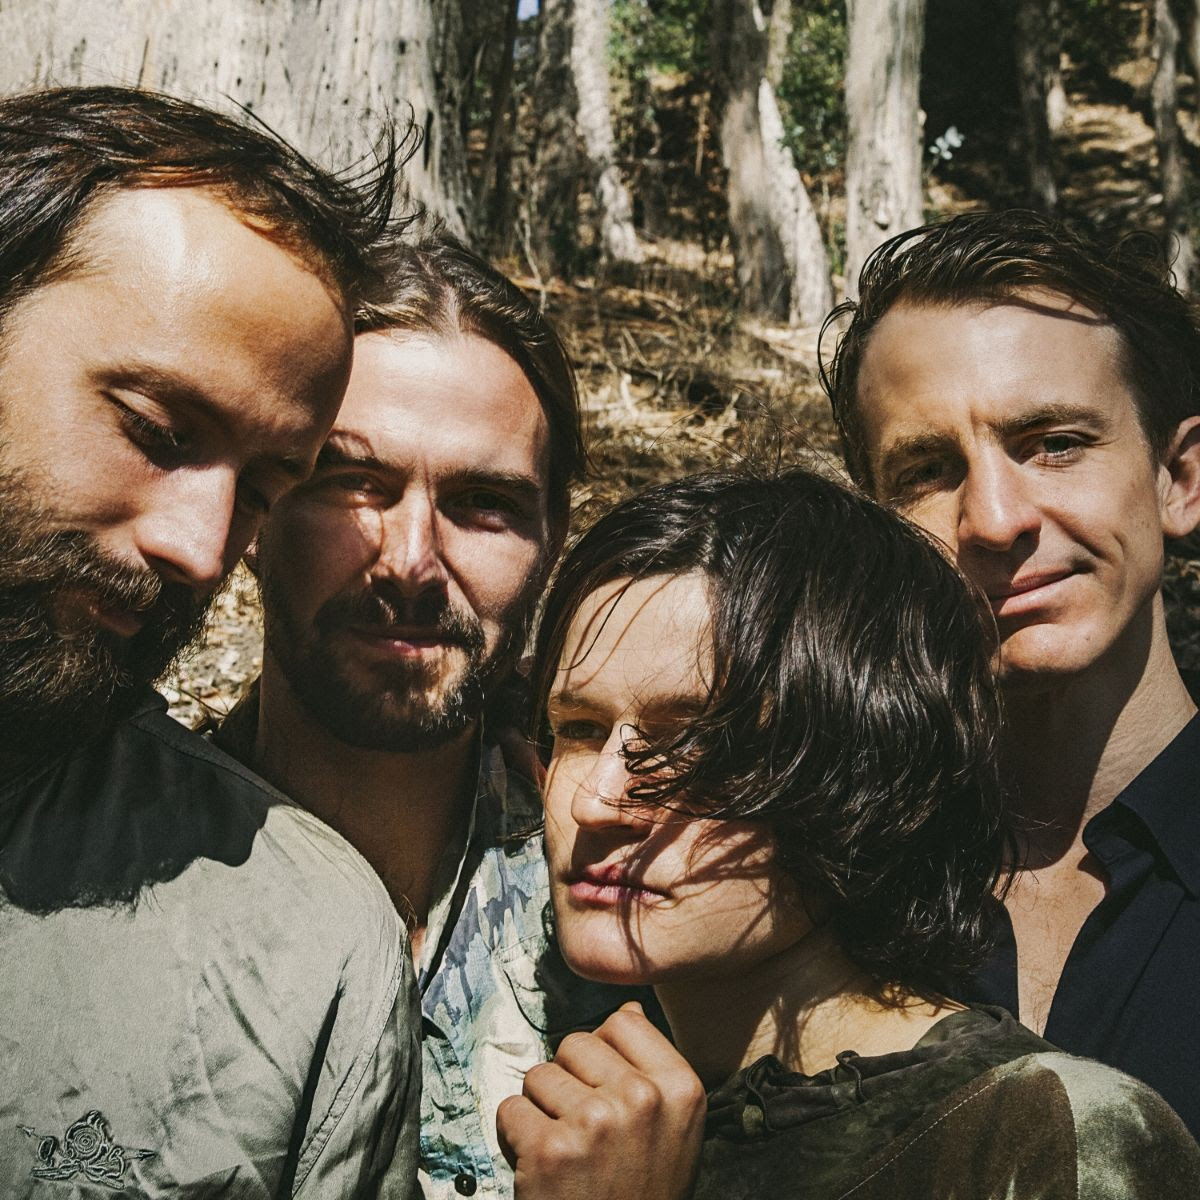 Big Thief Announce New Album <i>Two Hands</i>, Release “Not”” title=”Big Thief Two Hands Album Not Song Listen” data-original-id=”338736″ data-adjusted-id=”338736″ class=”sm_size_full_width sm_alignment_center ” data-image-use=”multiple_use” data-image-source=”video_screenshot” /></p>
<p>1. Rock And Sing<br />
2. Forgotten Eyes<br />
3. The Toy<br />
4. Two Hands<br />
5. Those Girls<br />
6. Shoulders<br />
7. Not<br />
8. Wolf<br />
9. Replaced<br />
10. Cut My Hair</p>
</p></p>  </div>
  <div class=